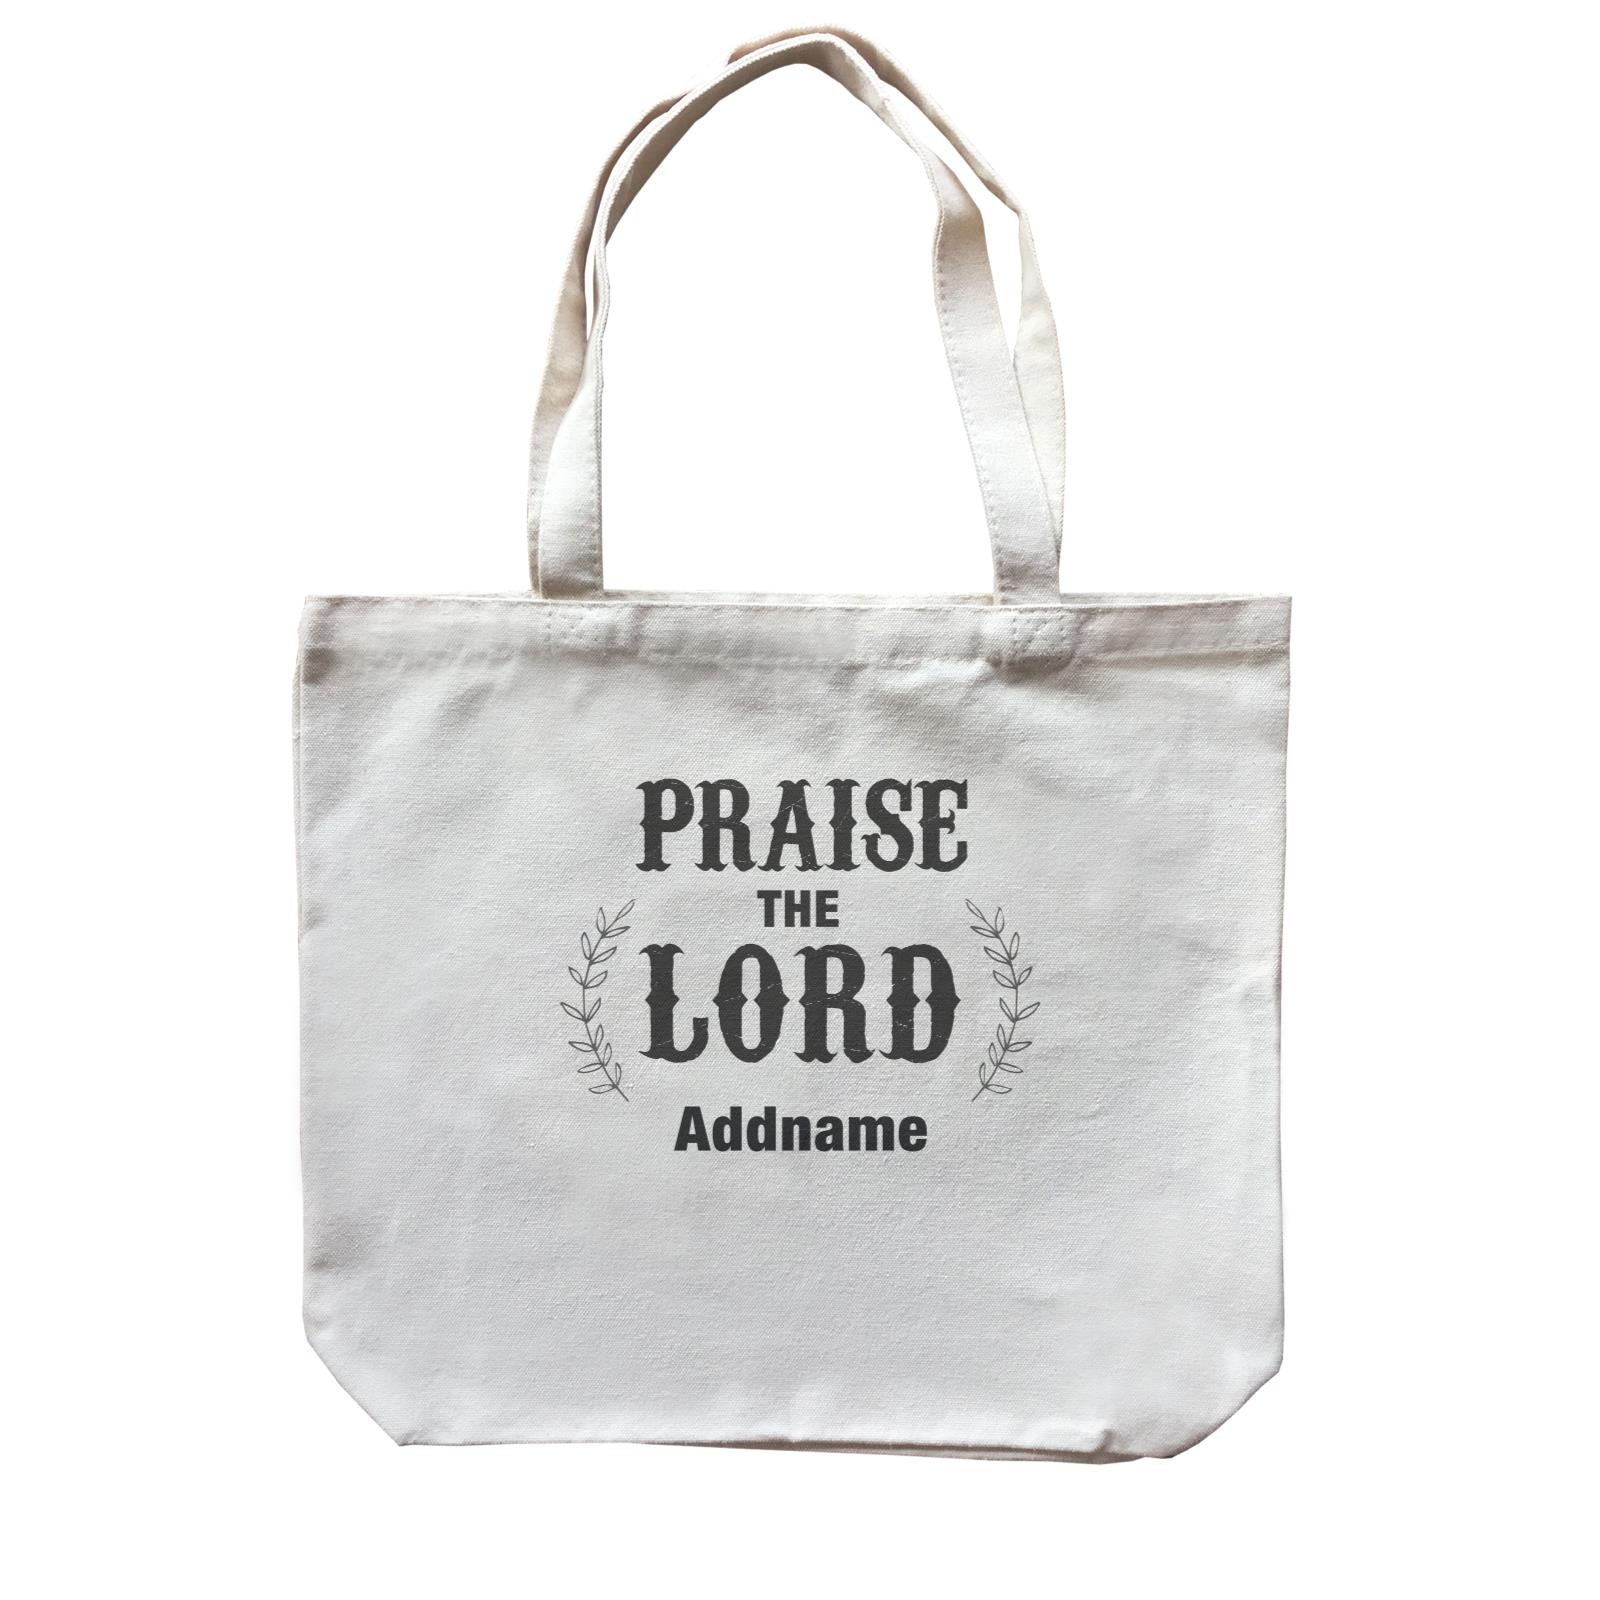 Christian Series Praise The Lord Addname Canvas Bag